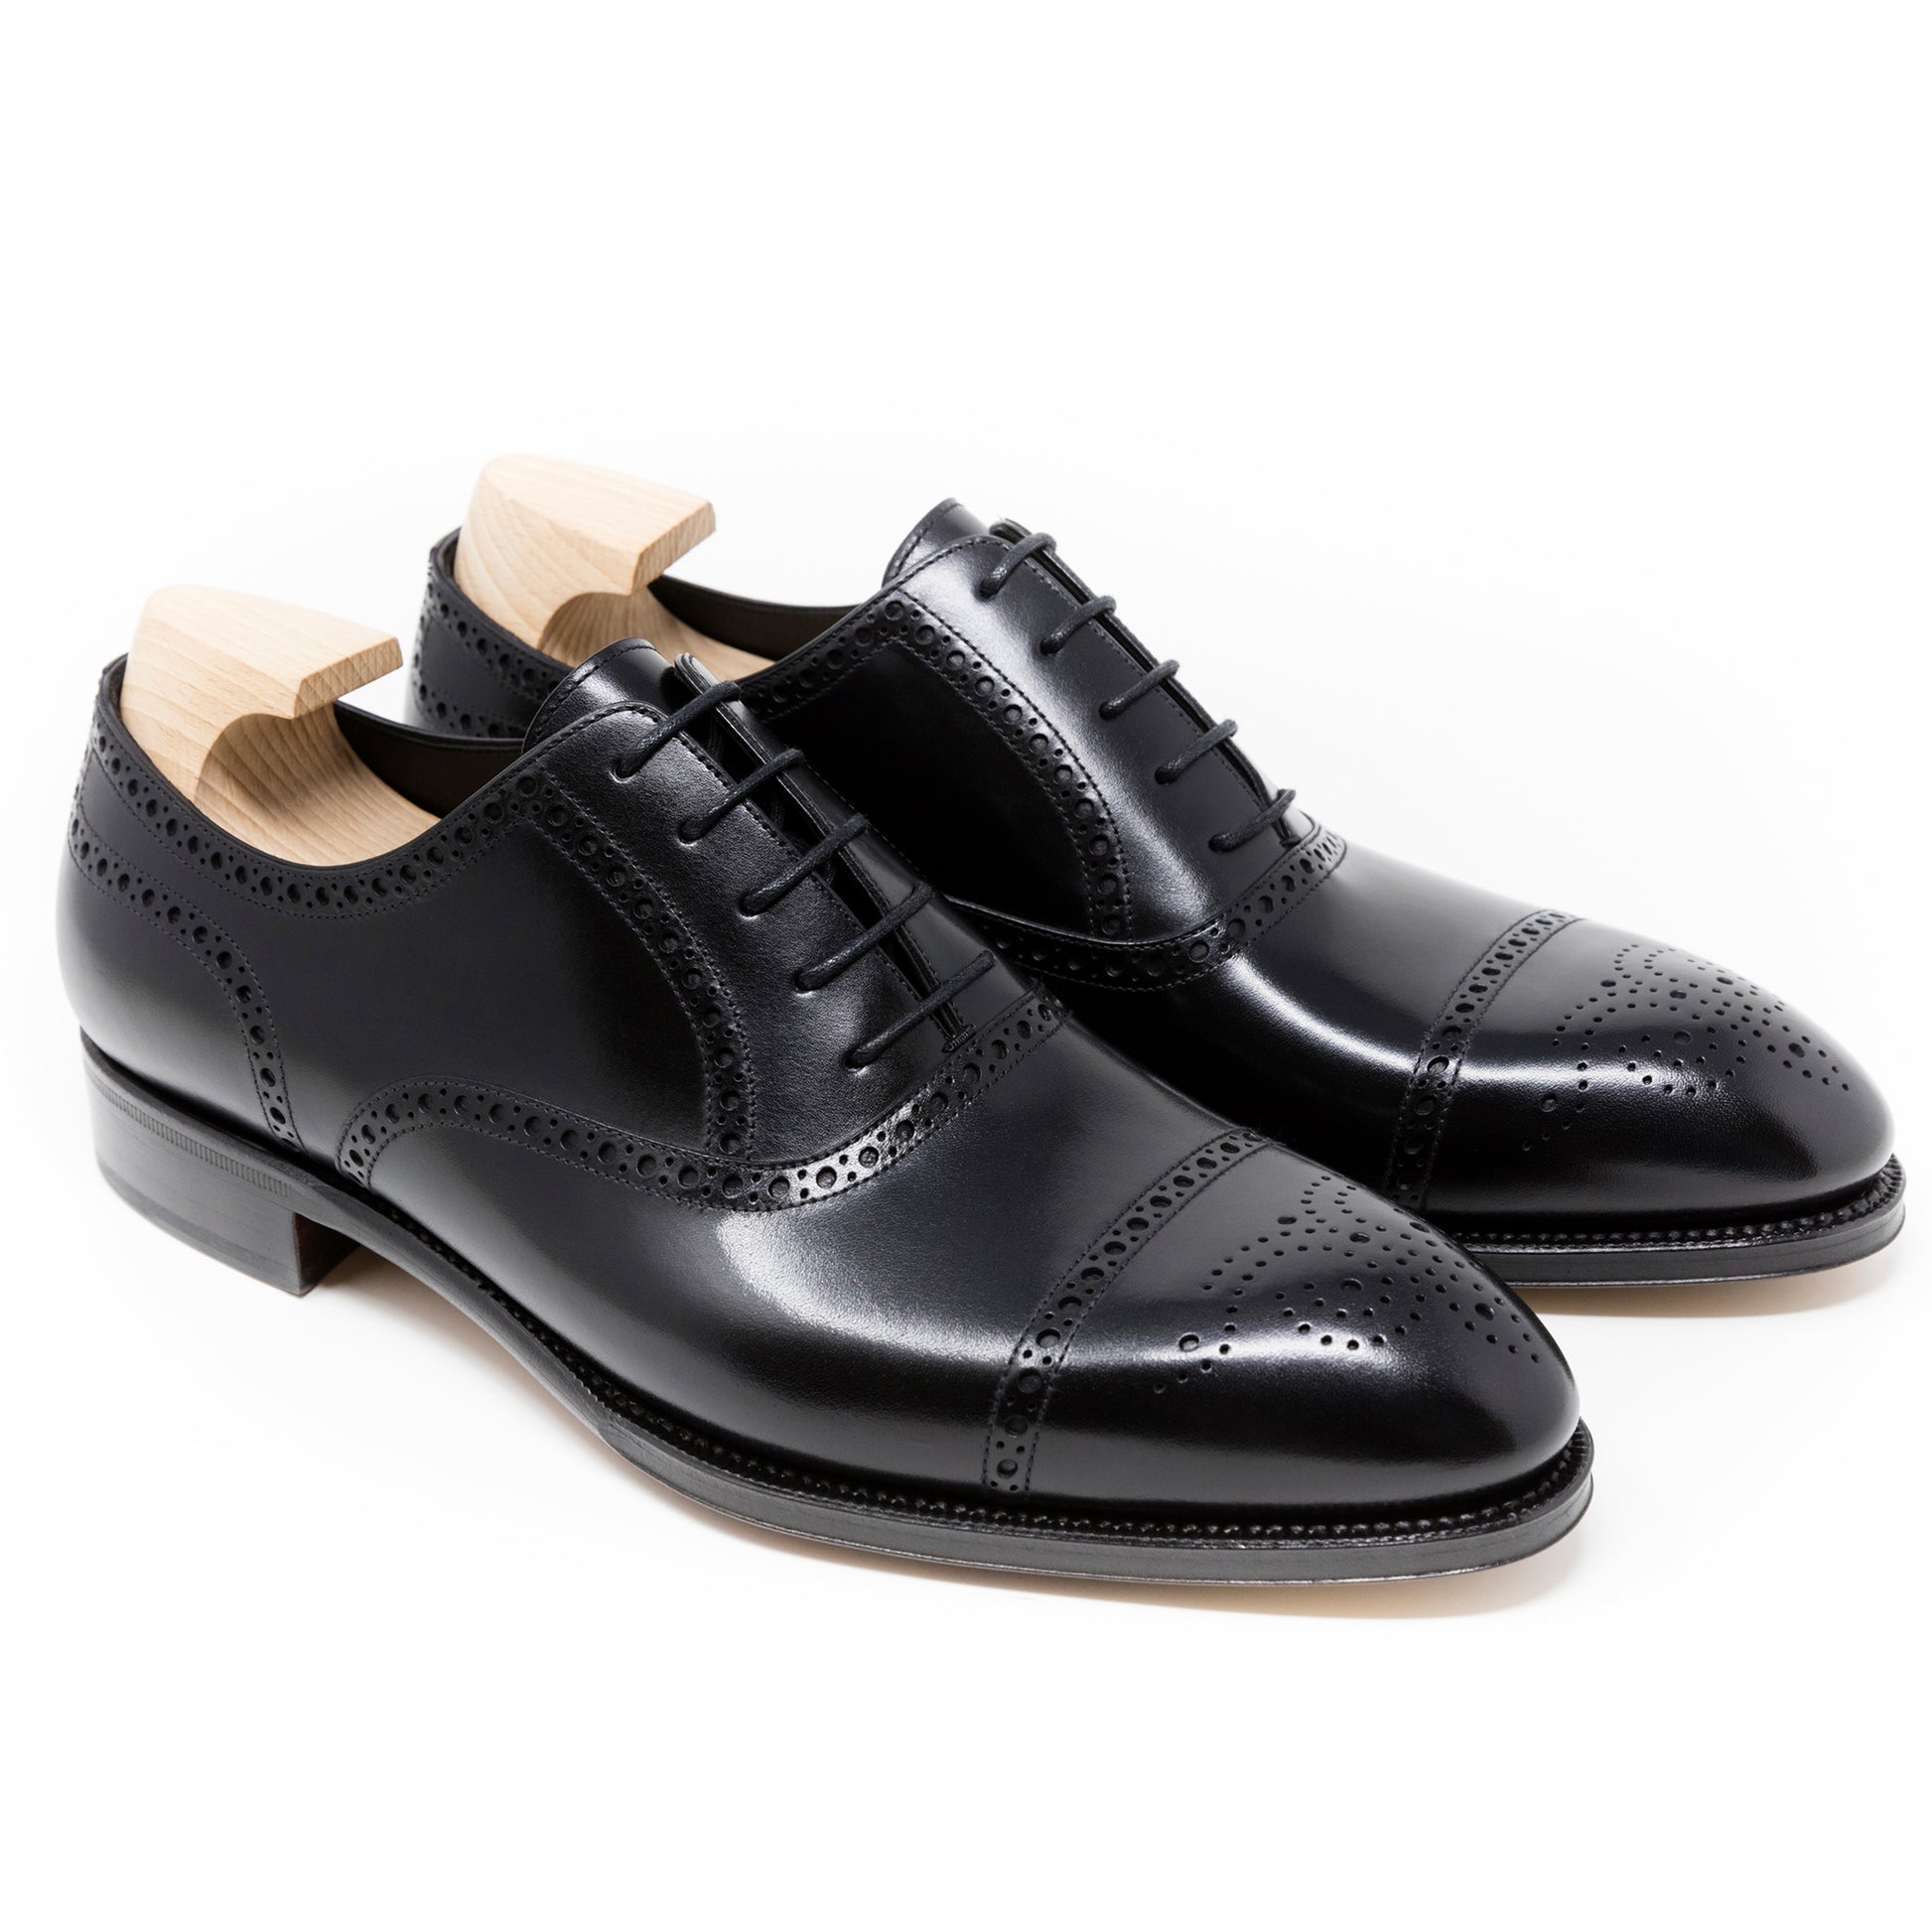 TLB Mallorca leather shoes 654 / OLIVER / BOXCALF BLACK